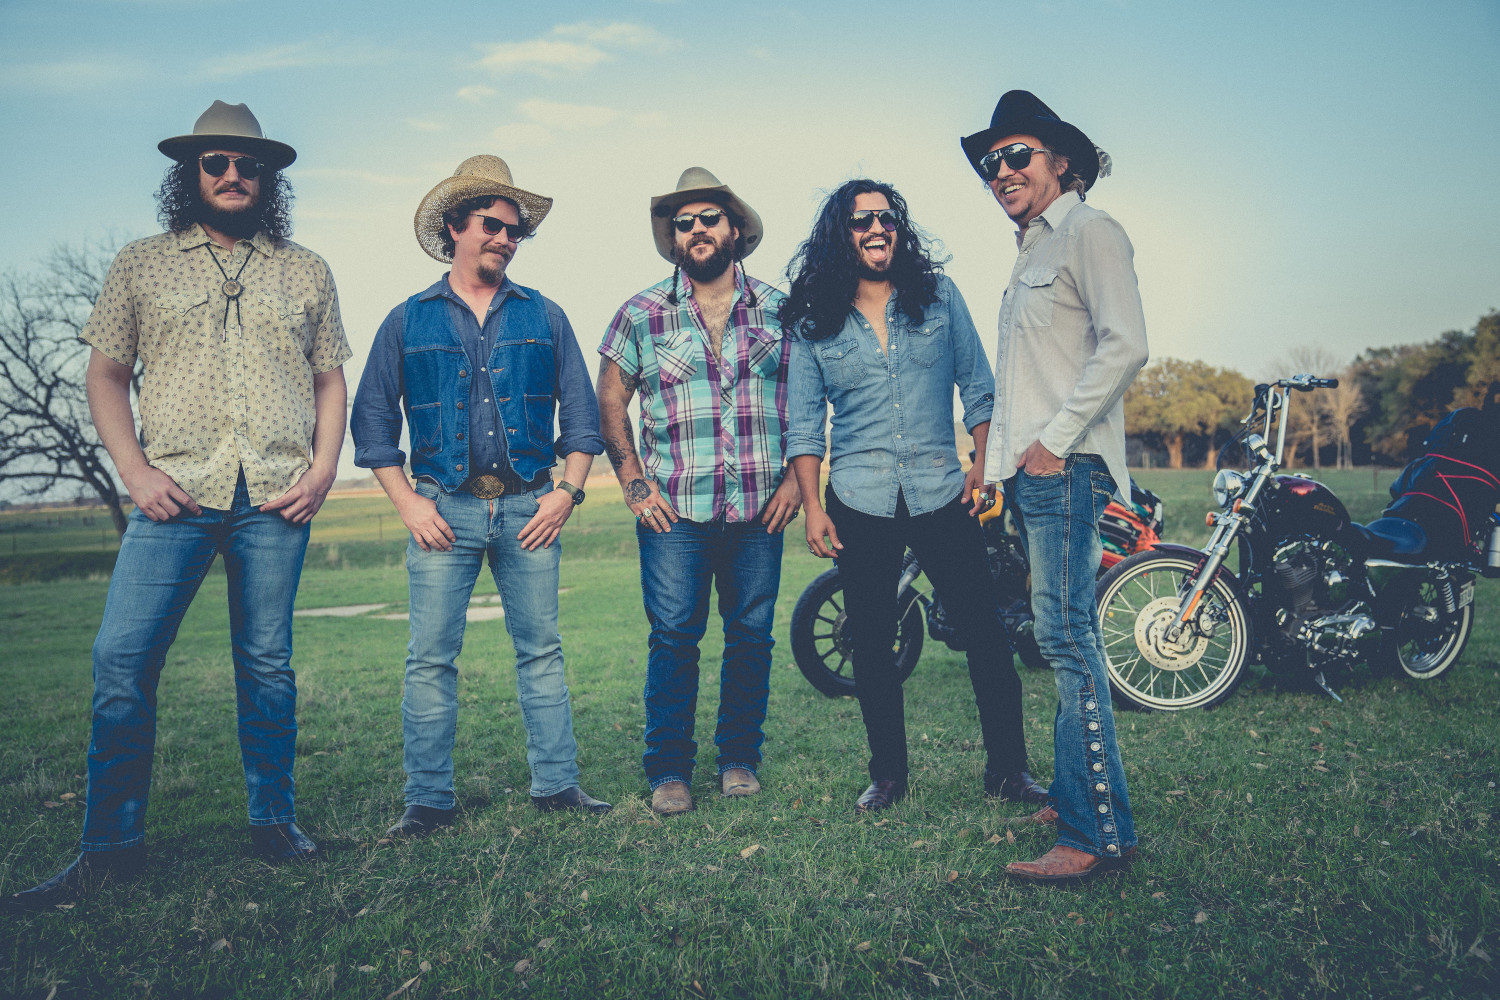 Mike & The Moonpies over for Huercasa Festival next weekend